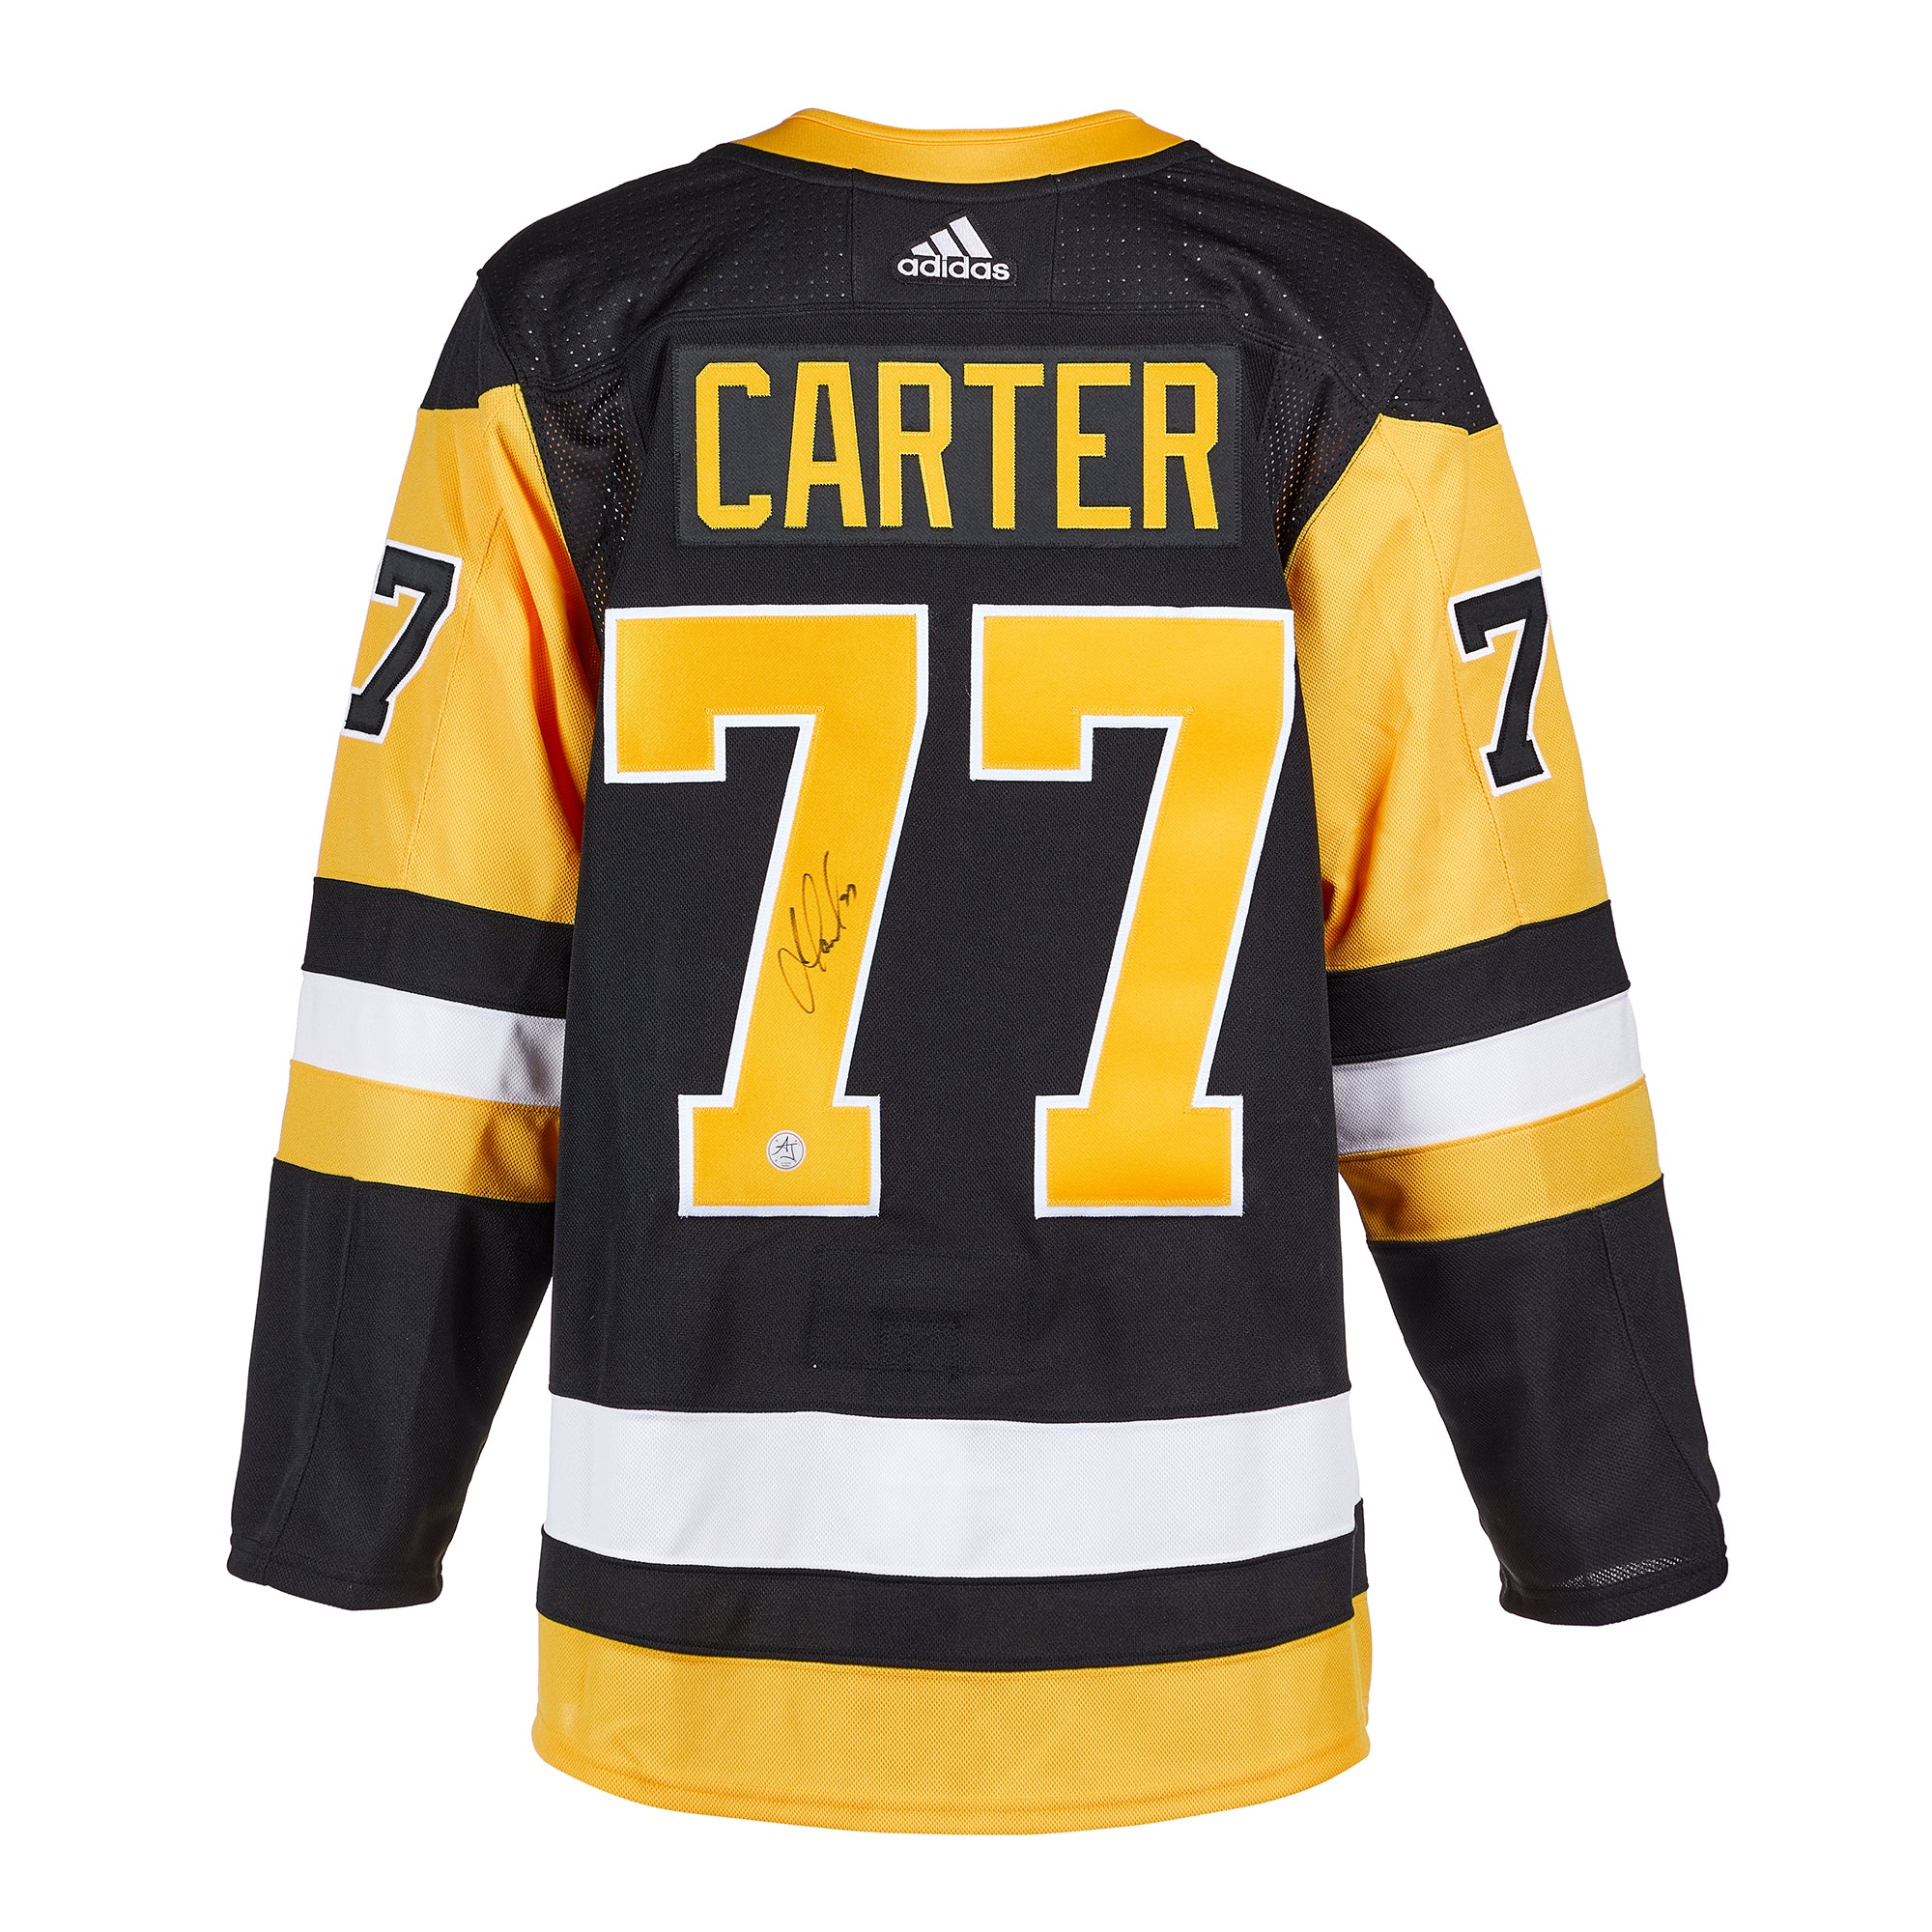 Jeff Carter Pittsburgh Penguins Autographed Signed Reverse Retro Adidas  Jersey